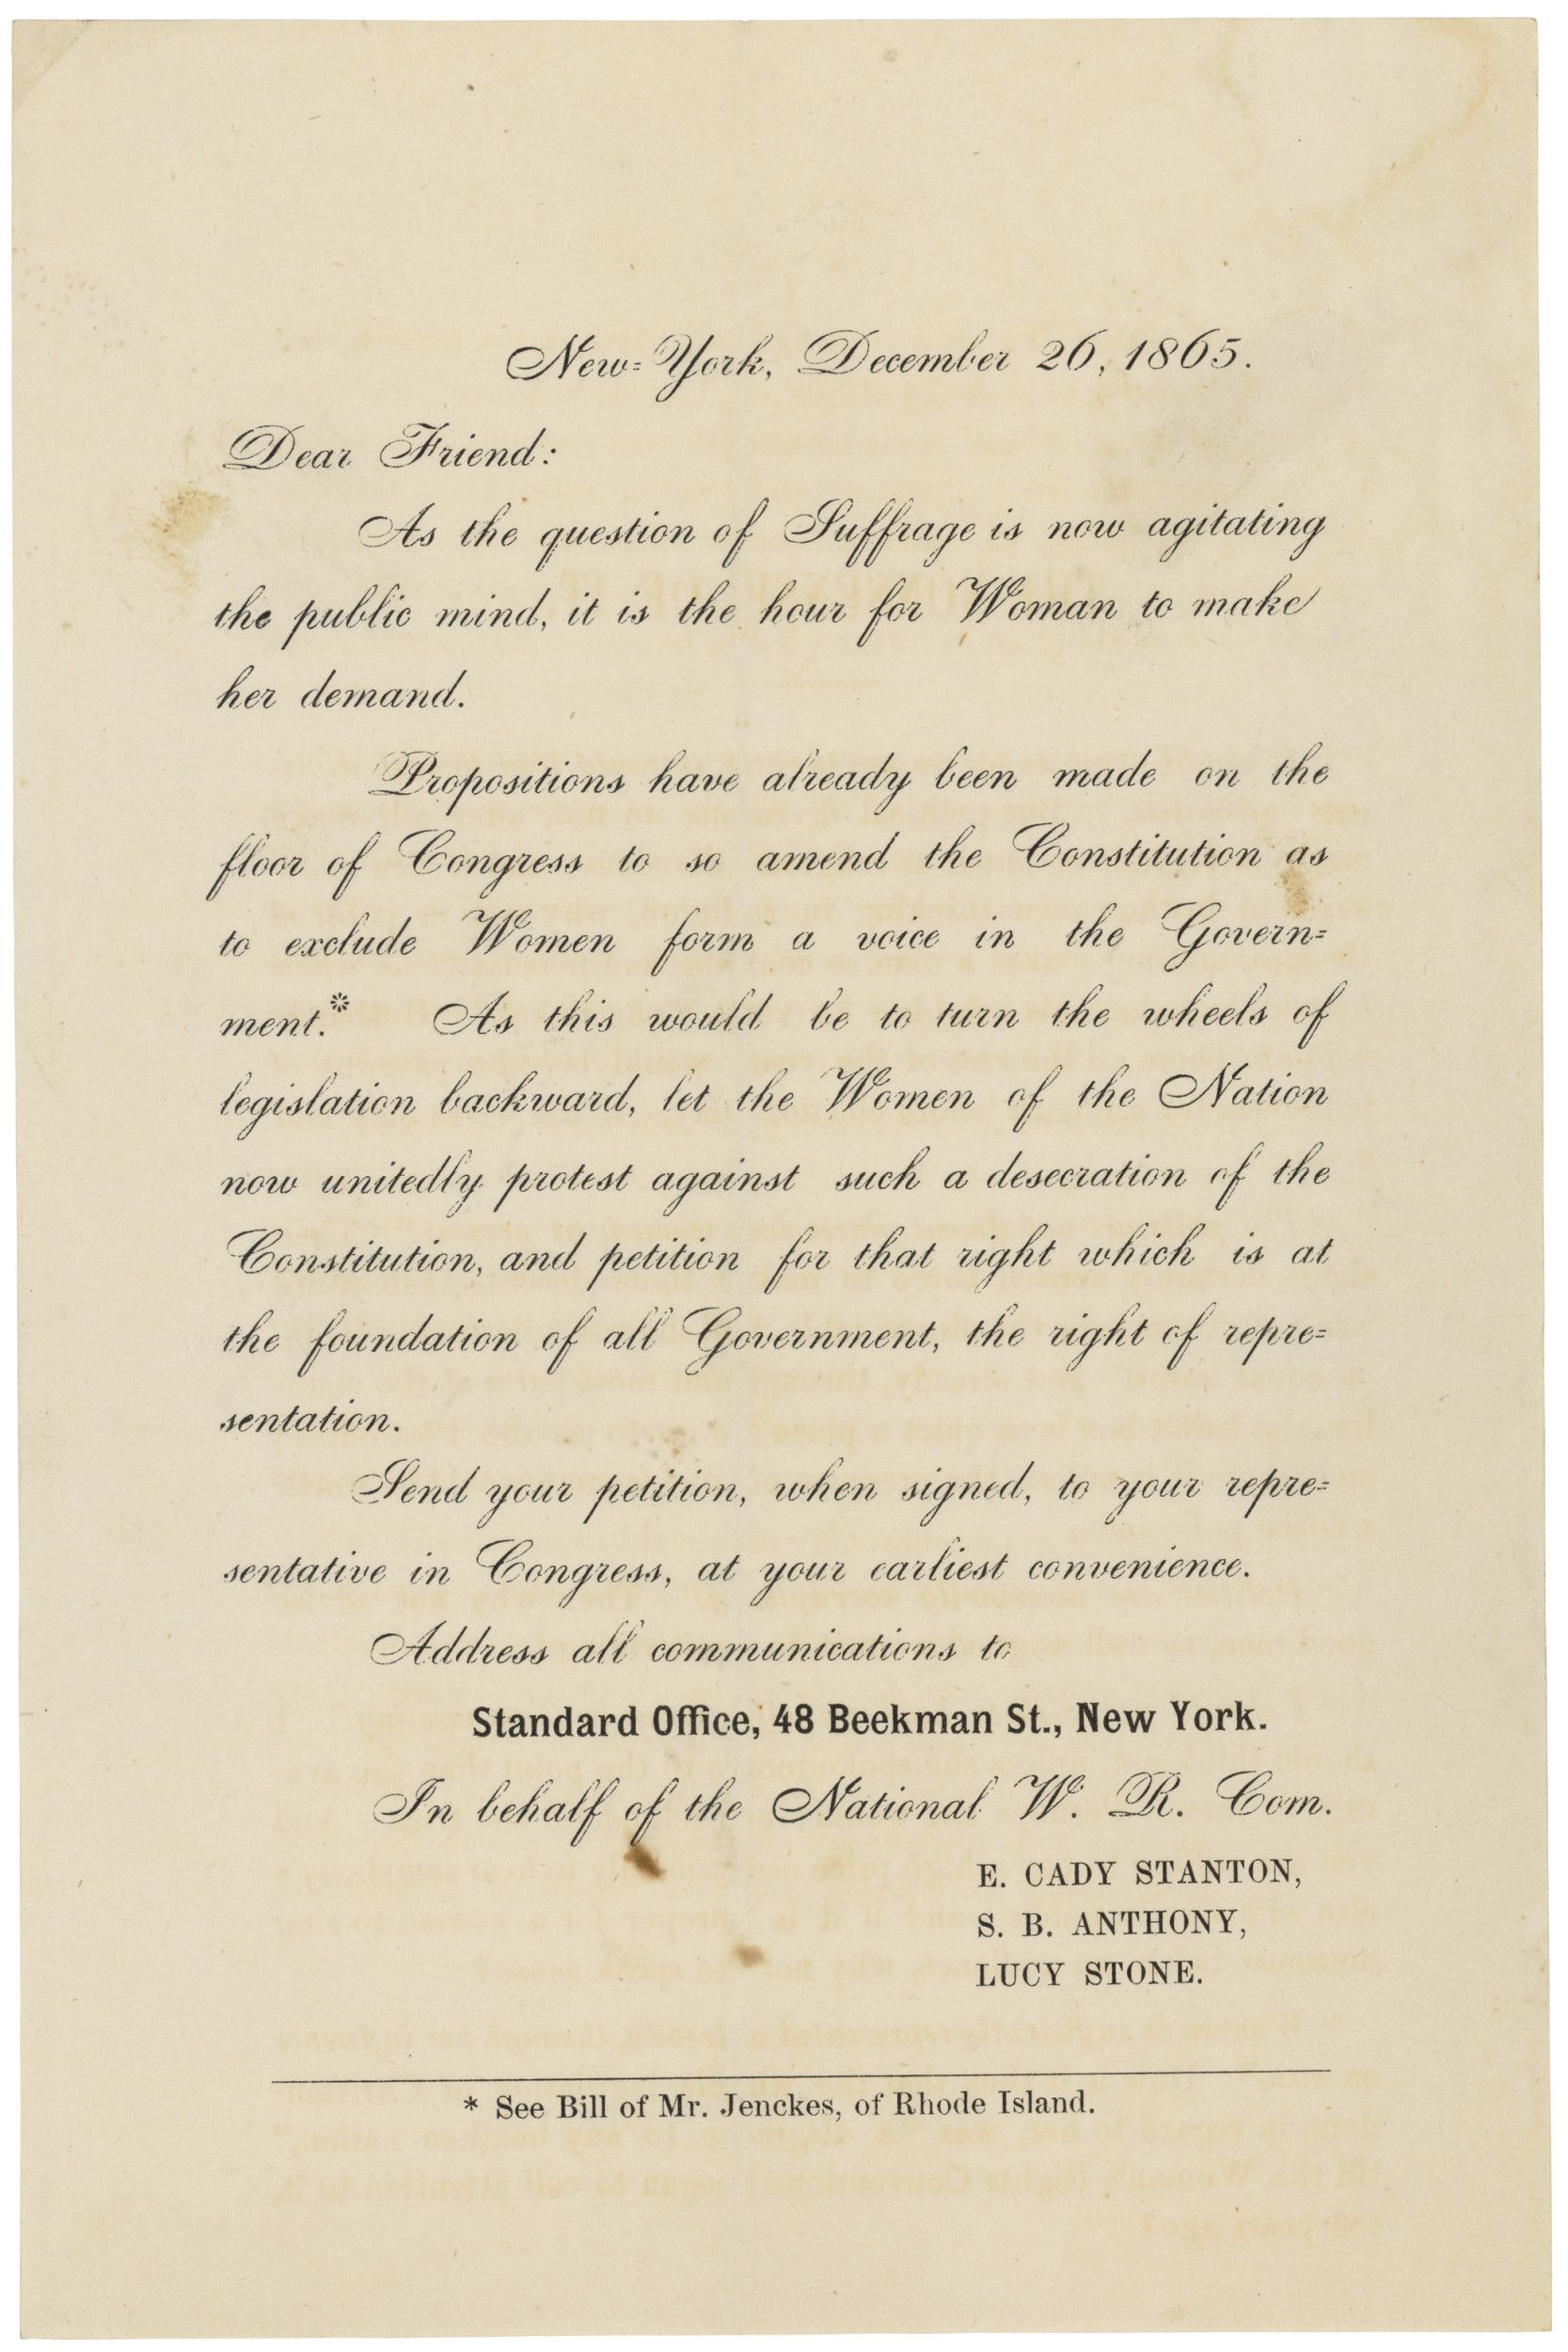   Form Letter from E. Cady Stanton, Susan B. Anthony, and Lucy Stone  